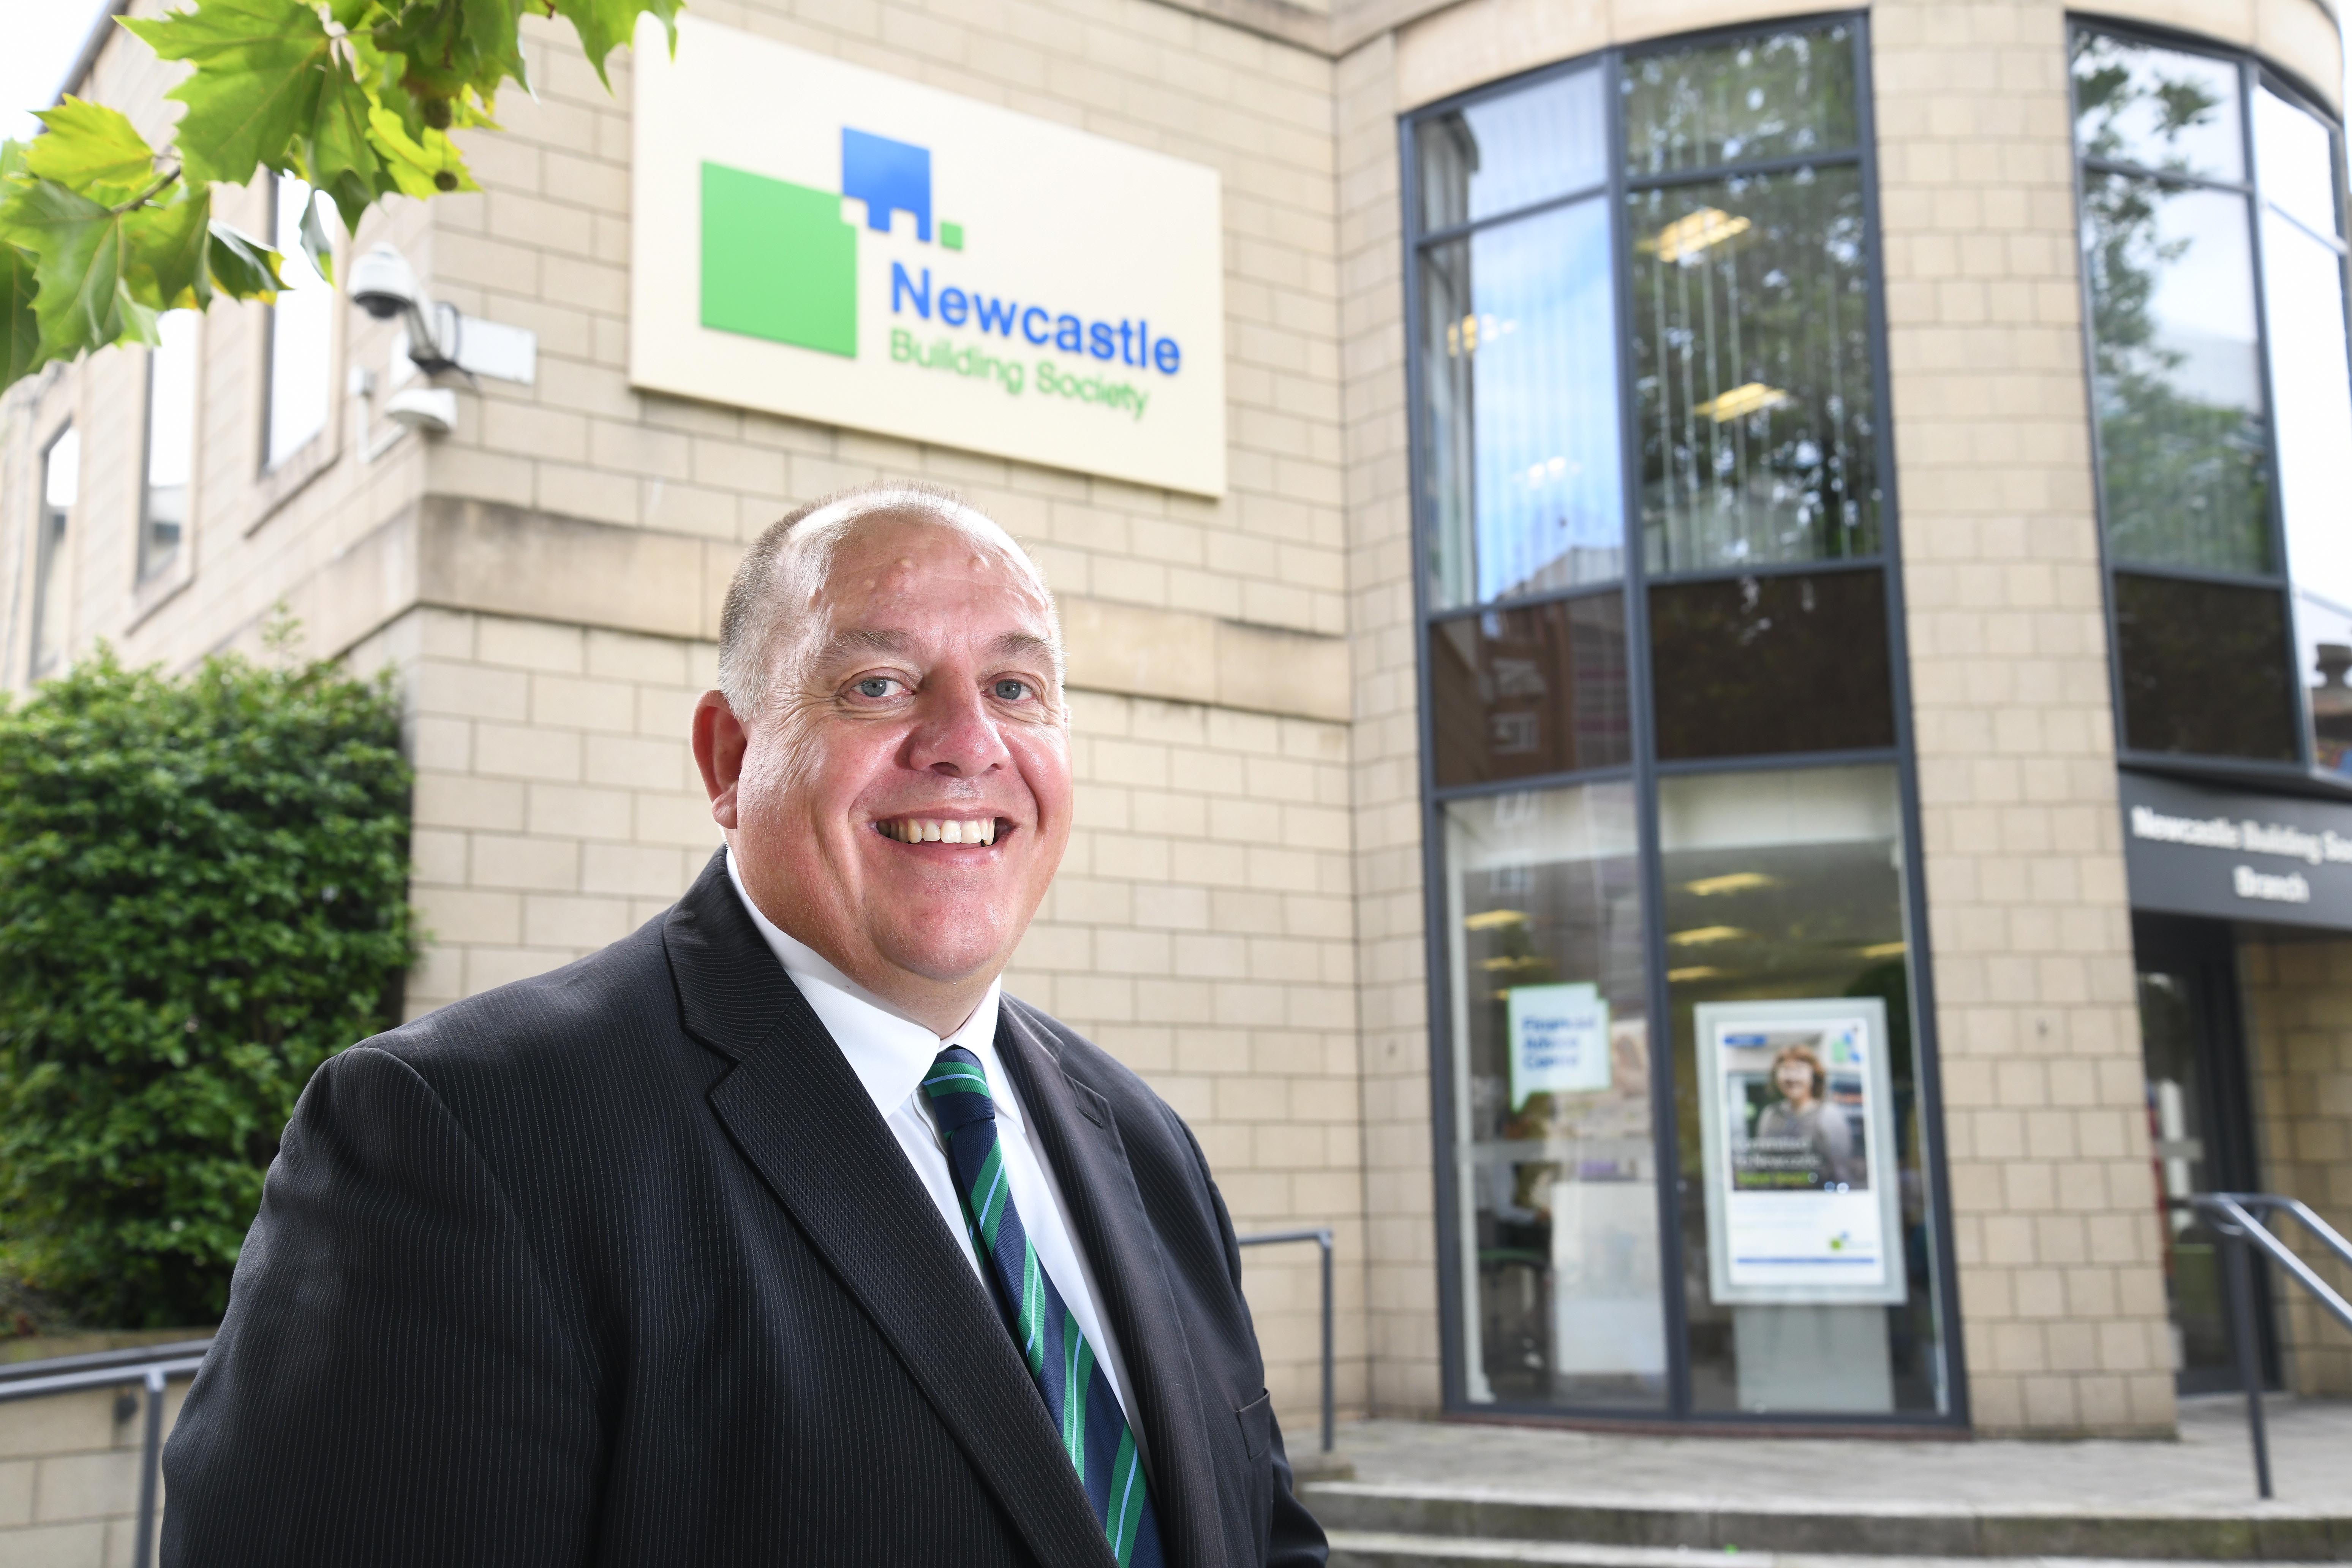 Newcastle Intermediaries reduces rates on 80% LTV products